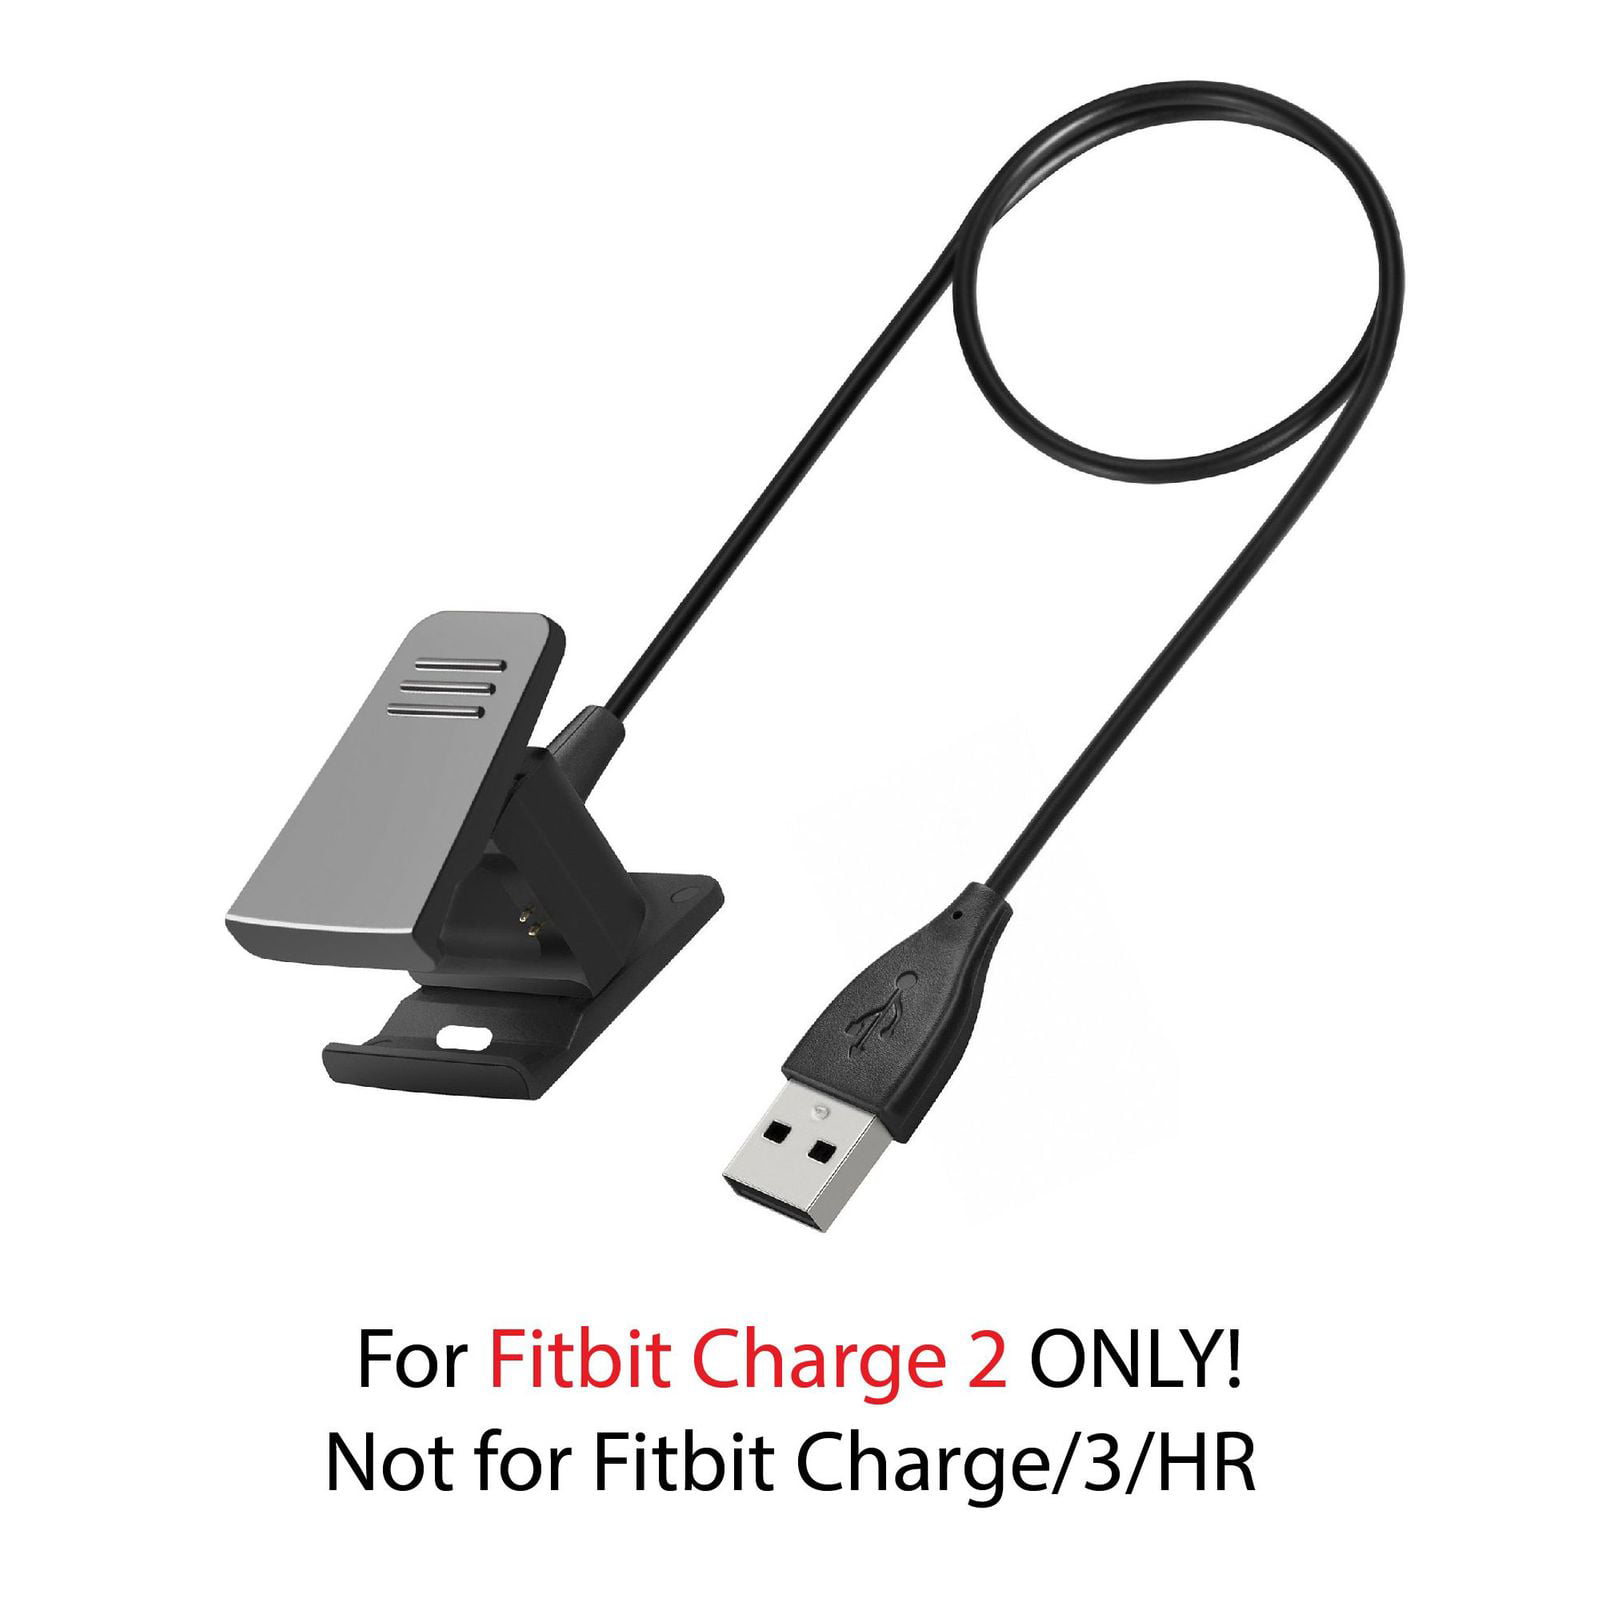 USB Charger Charging Cable For Fitbit Charge HR Wireless Activity Wristband WN5S 